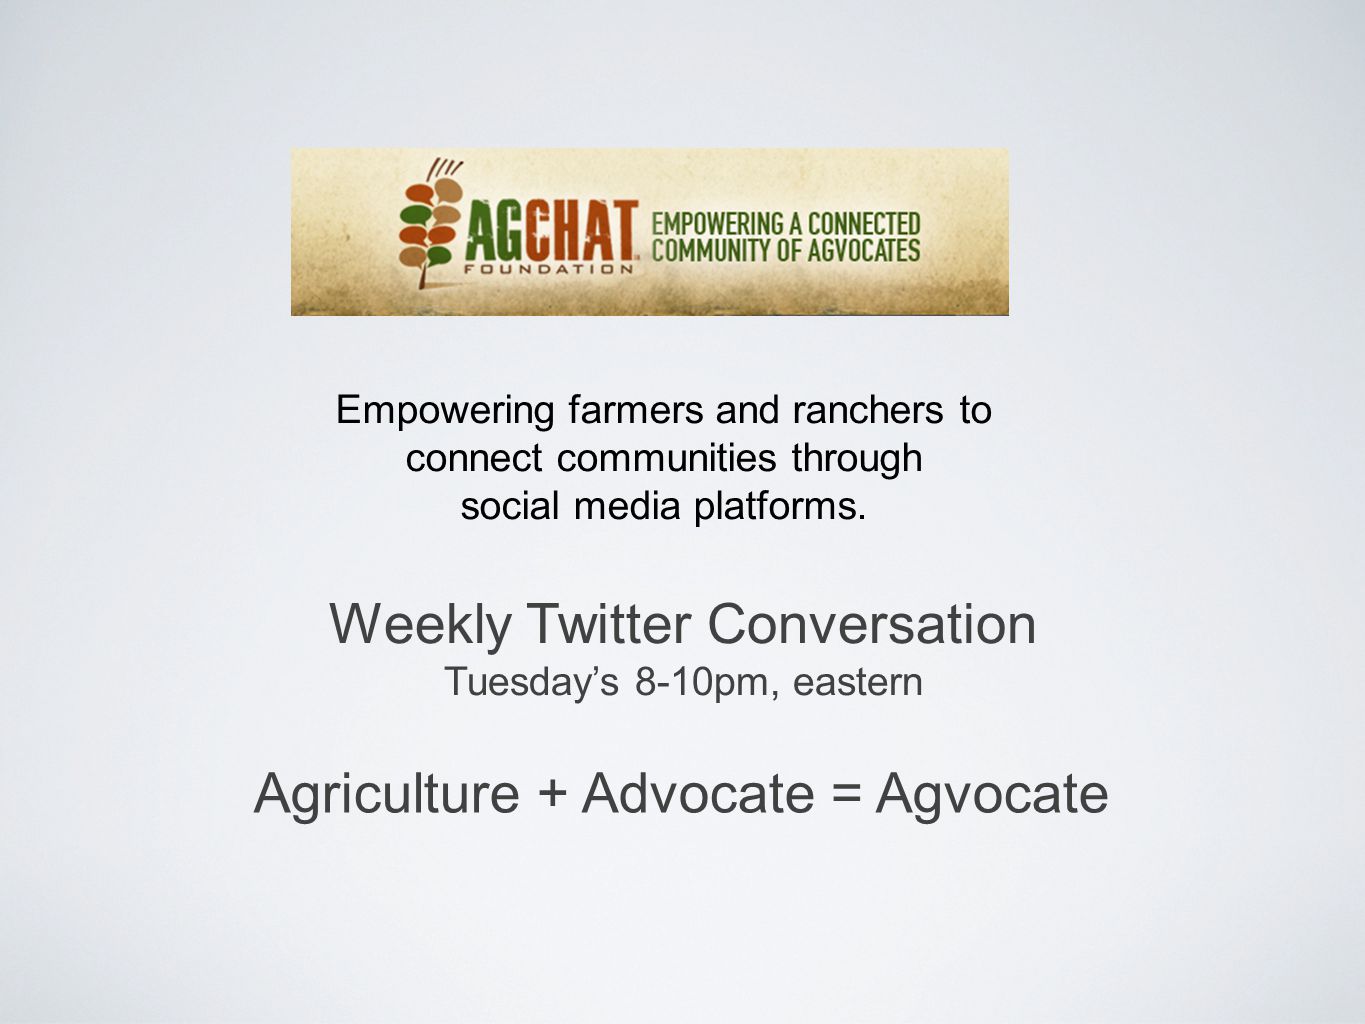 Agriculture + Advocate = Agvocate Empowering farmers and ranchers to connect communities through social media platforms.